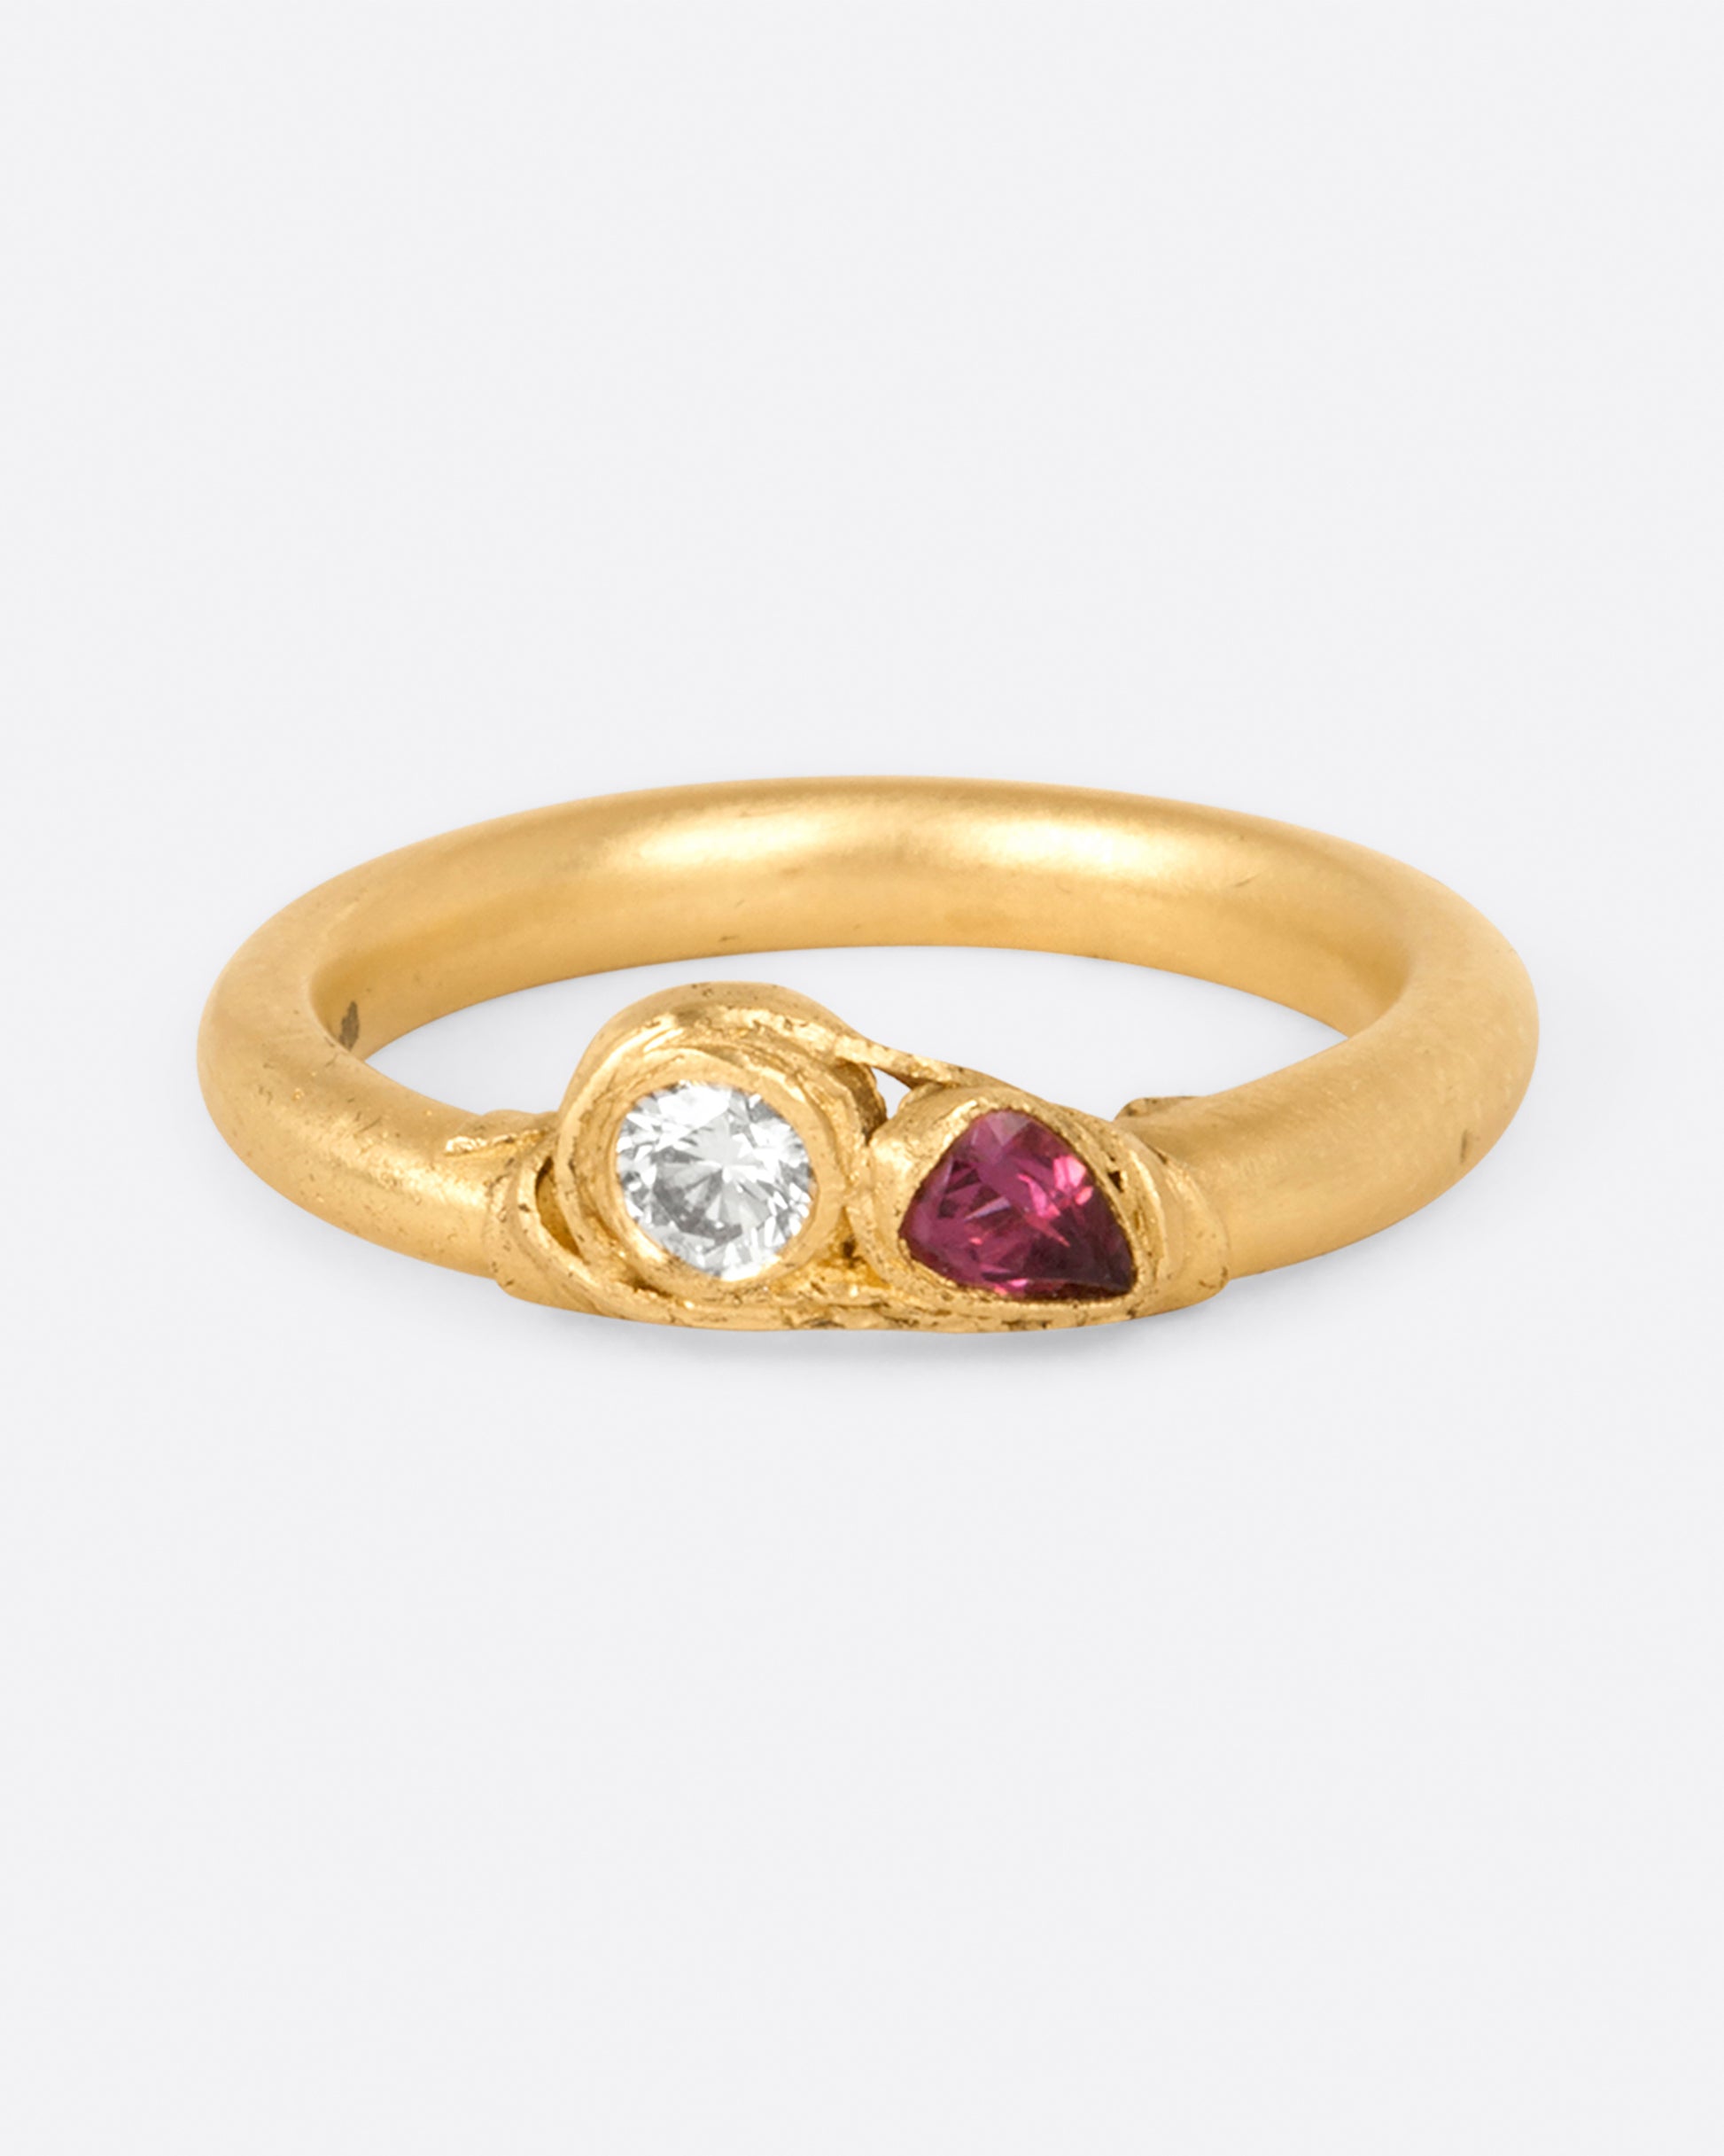 A round white diamond and a faceted ruby are held in place by one of Fraser Hamilton's signature wrapped settings.